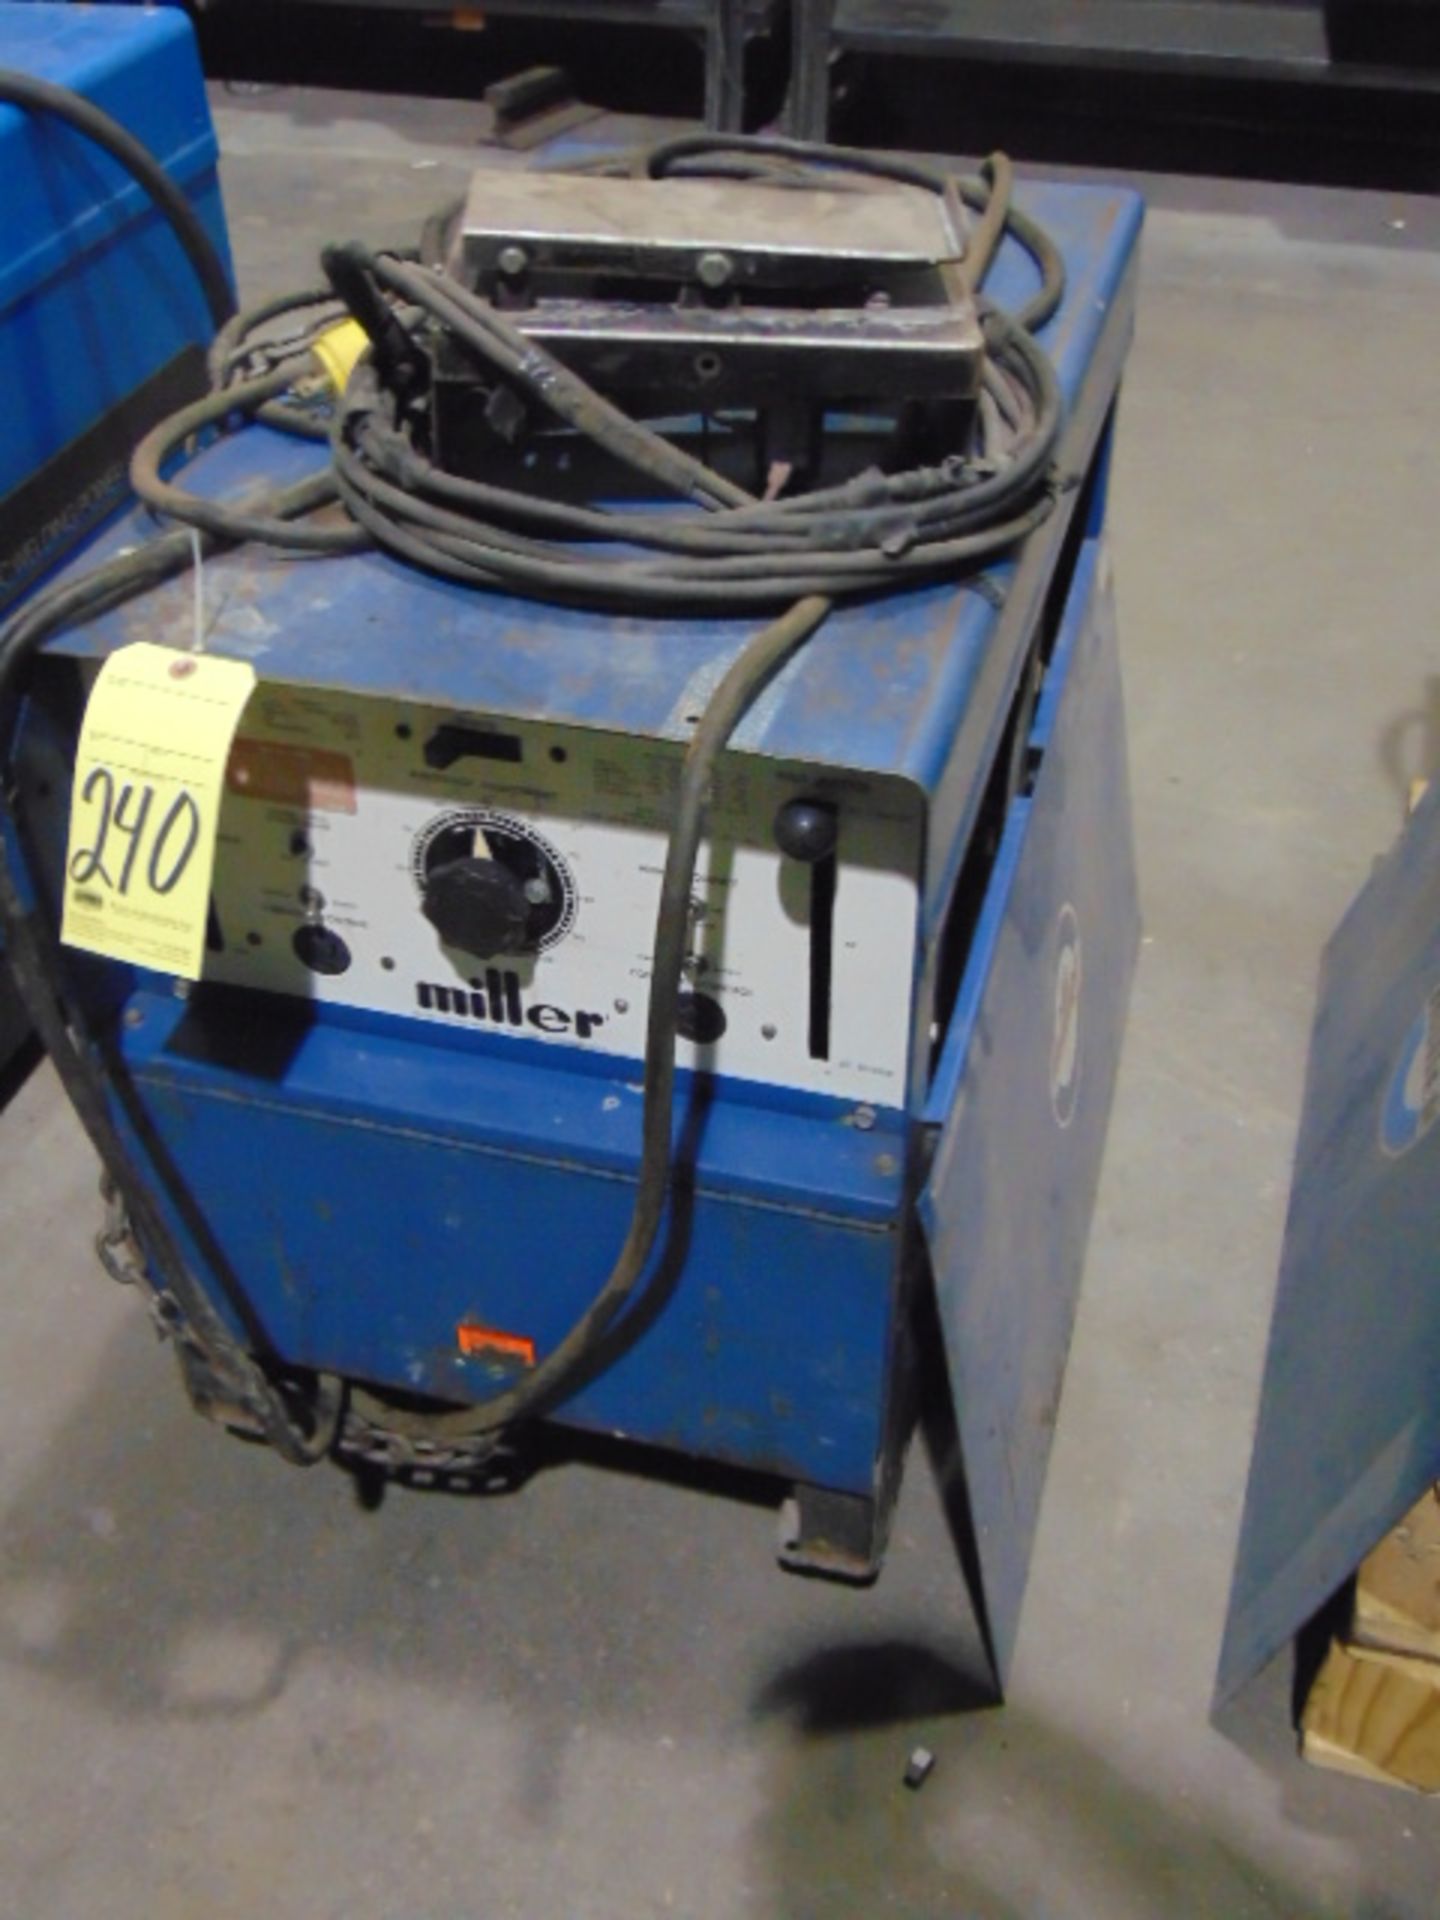 WELDING POWER SUPPLY, MACHINE, MILLER MDL. DIALARC HF, 250 amps @ 30 v., 40% duty cycle, S/N